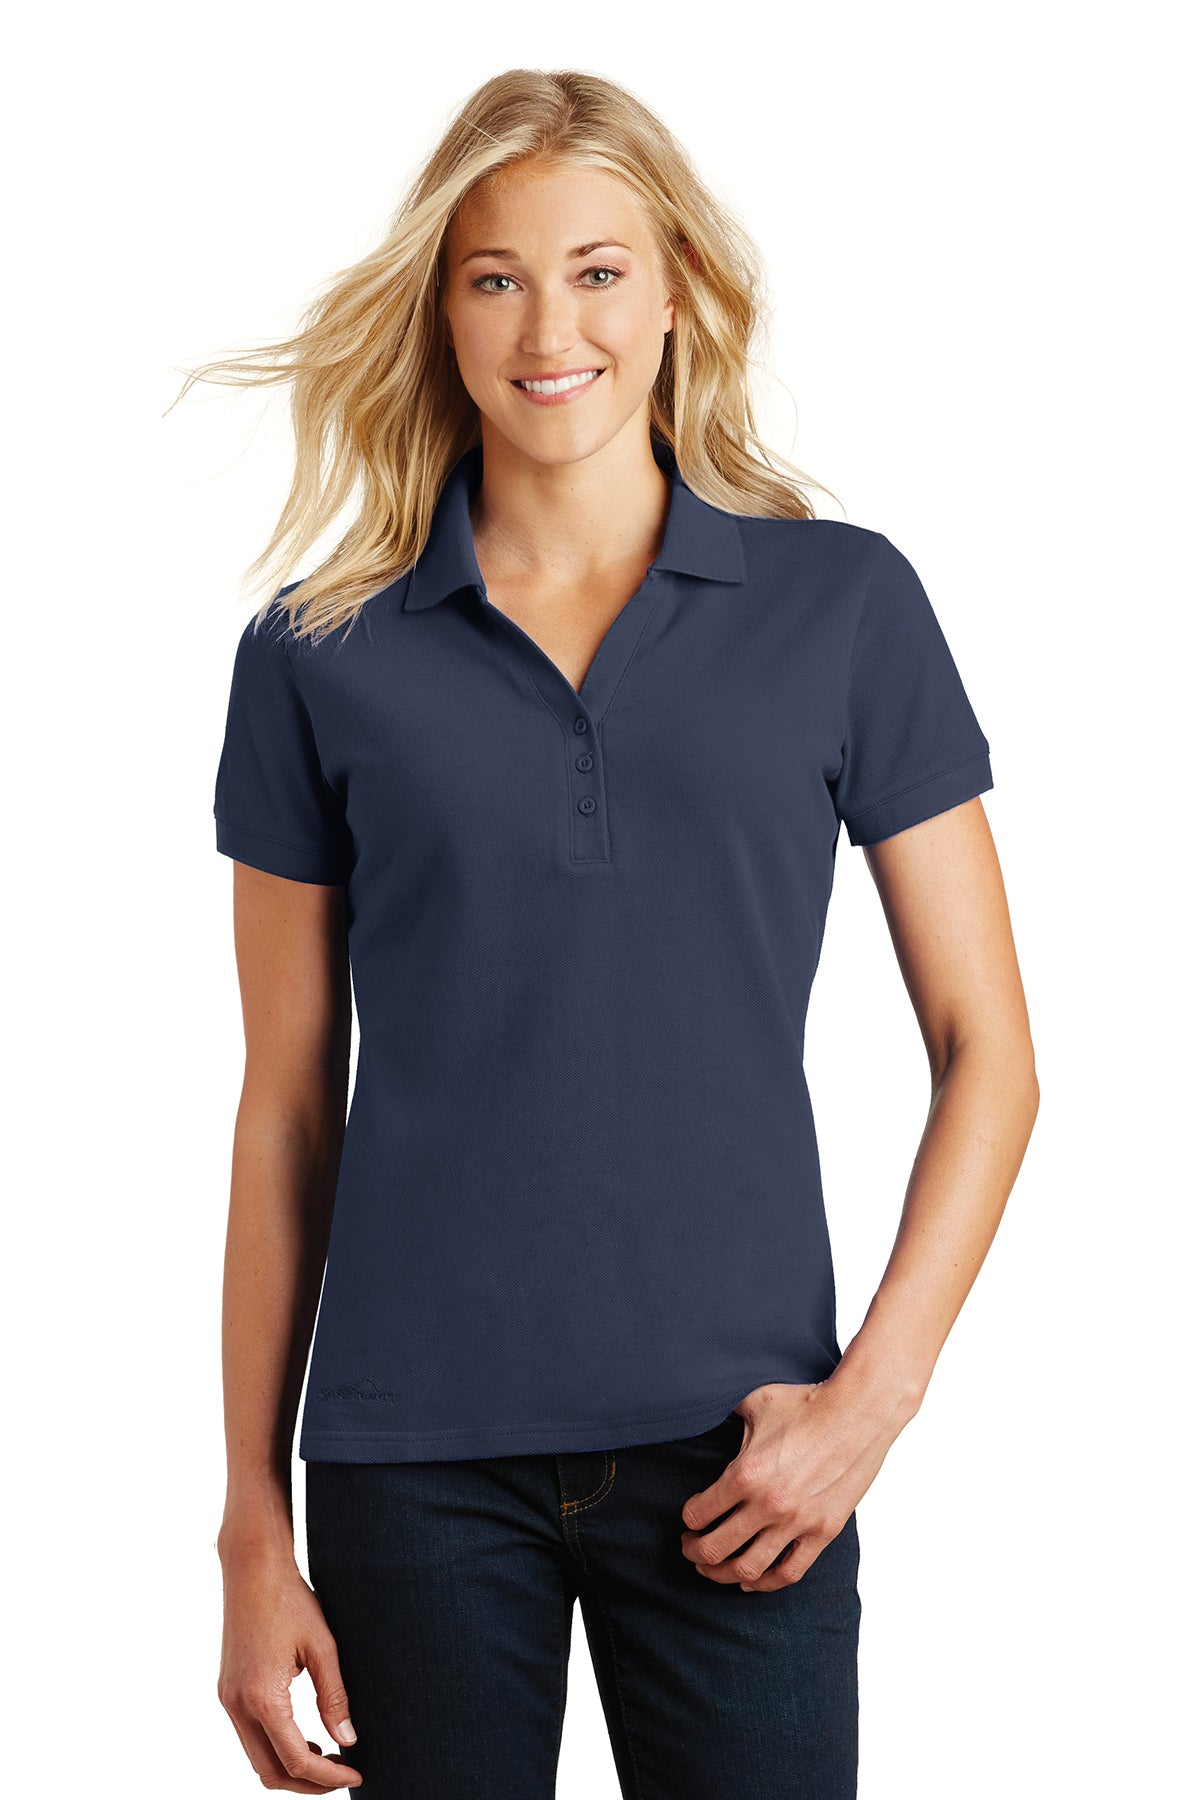 LL Lake Image (Embroidered) Women's Eddie Bauer golf polo